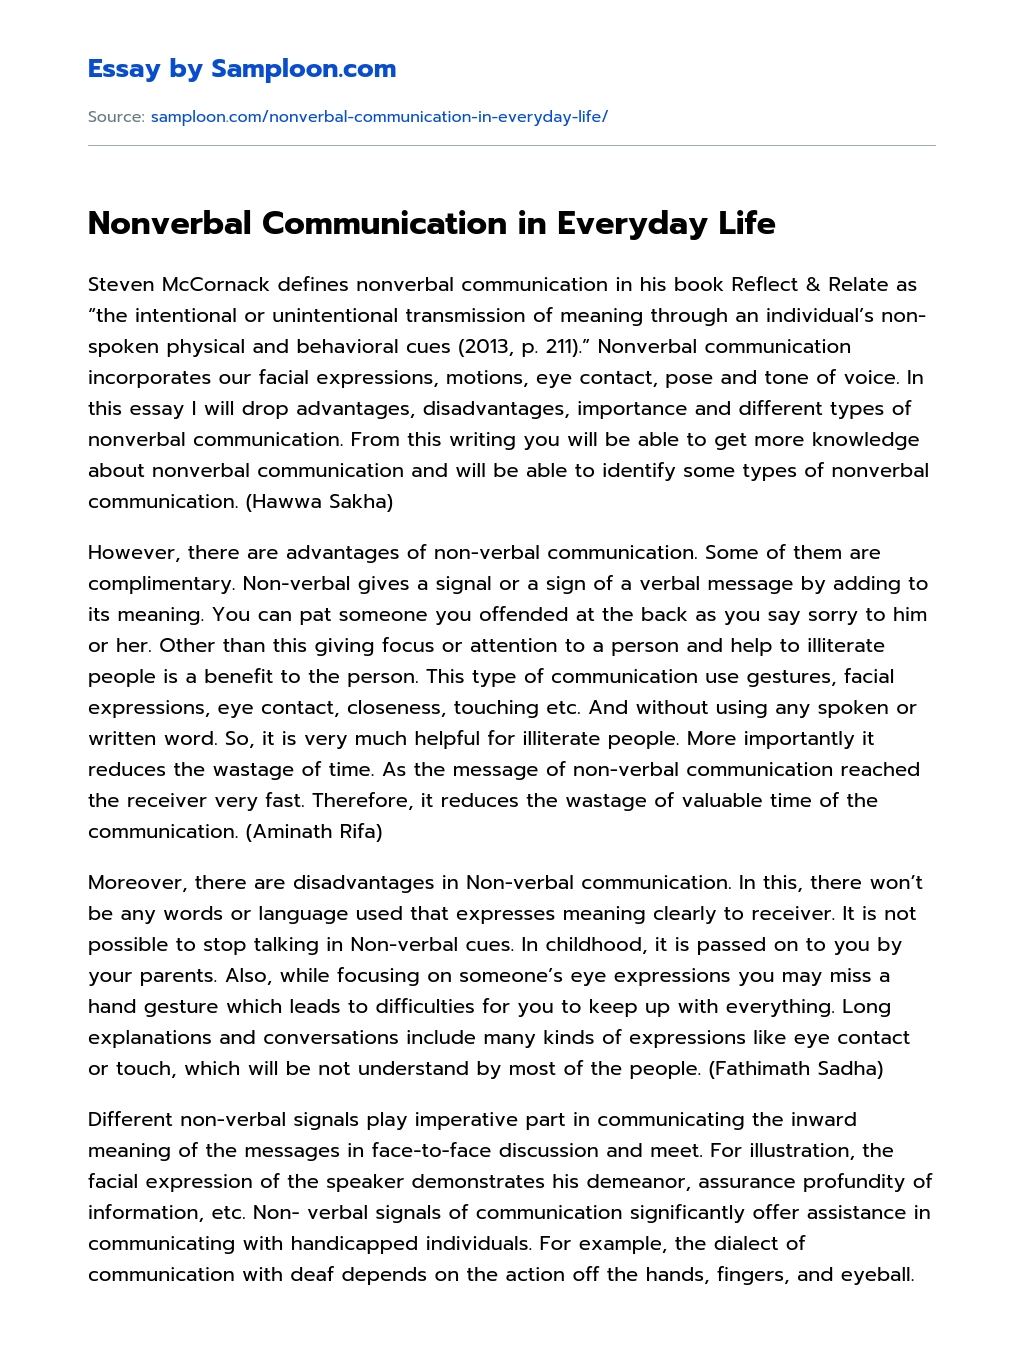 Nonverbal Communication in Everyday Life essay